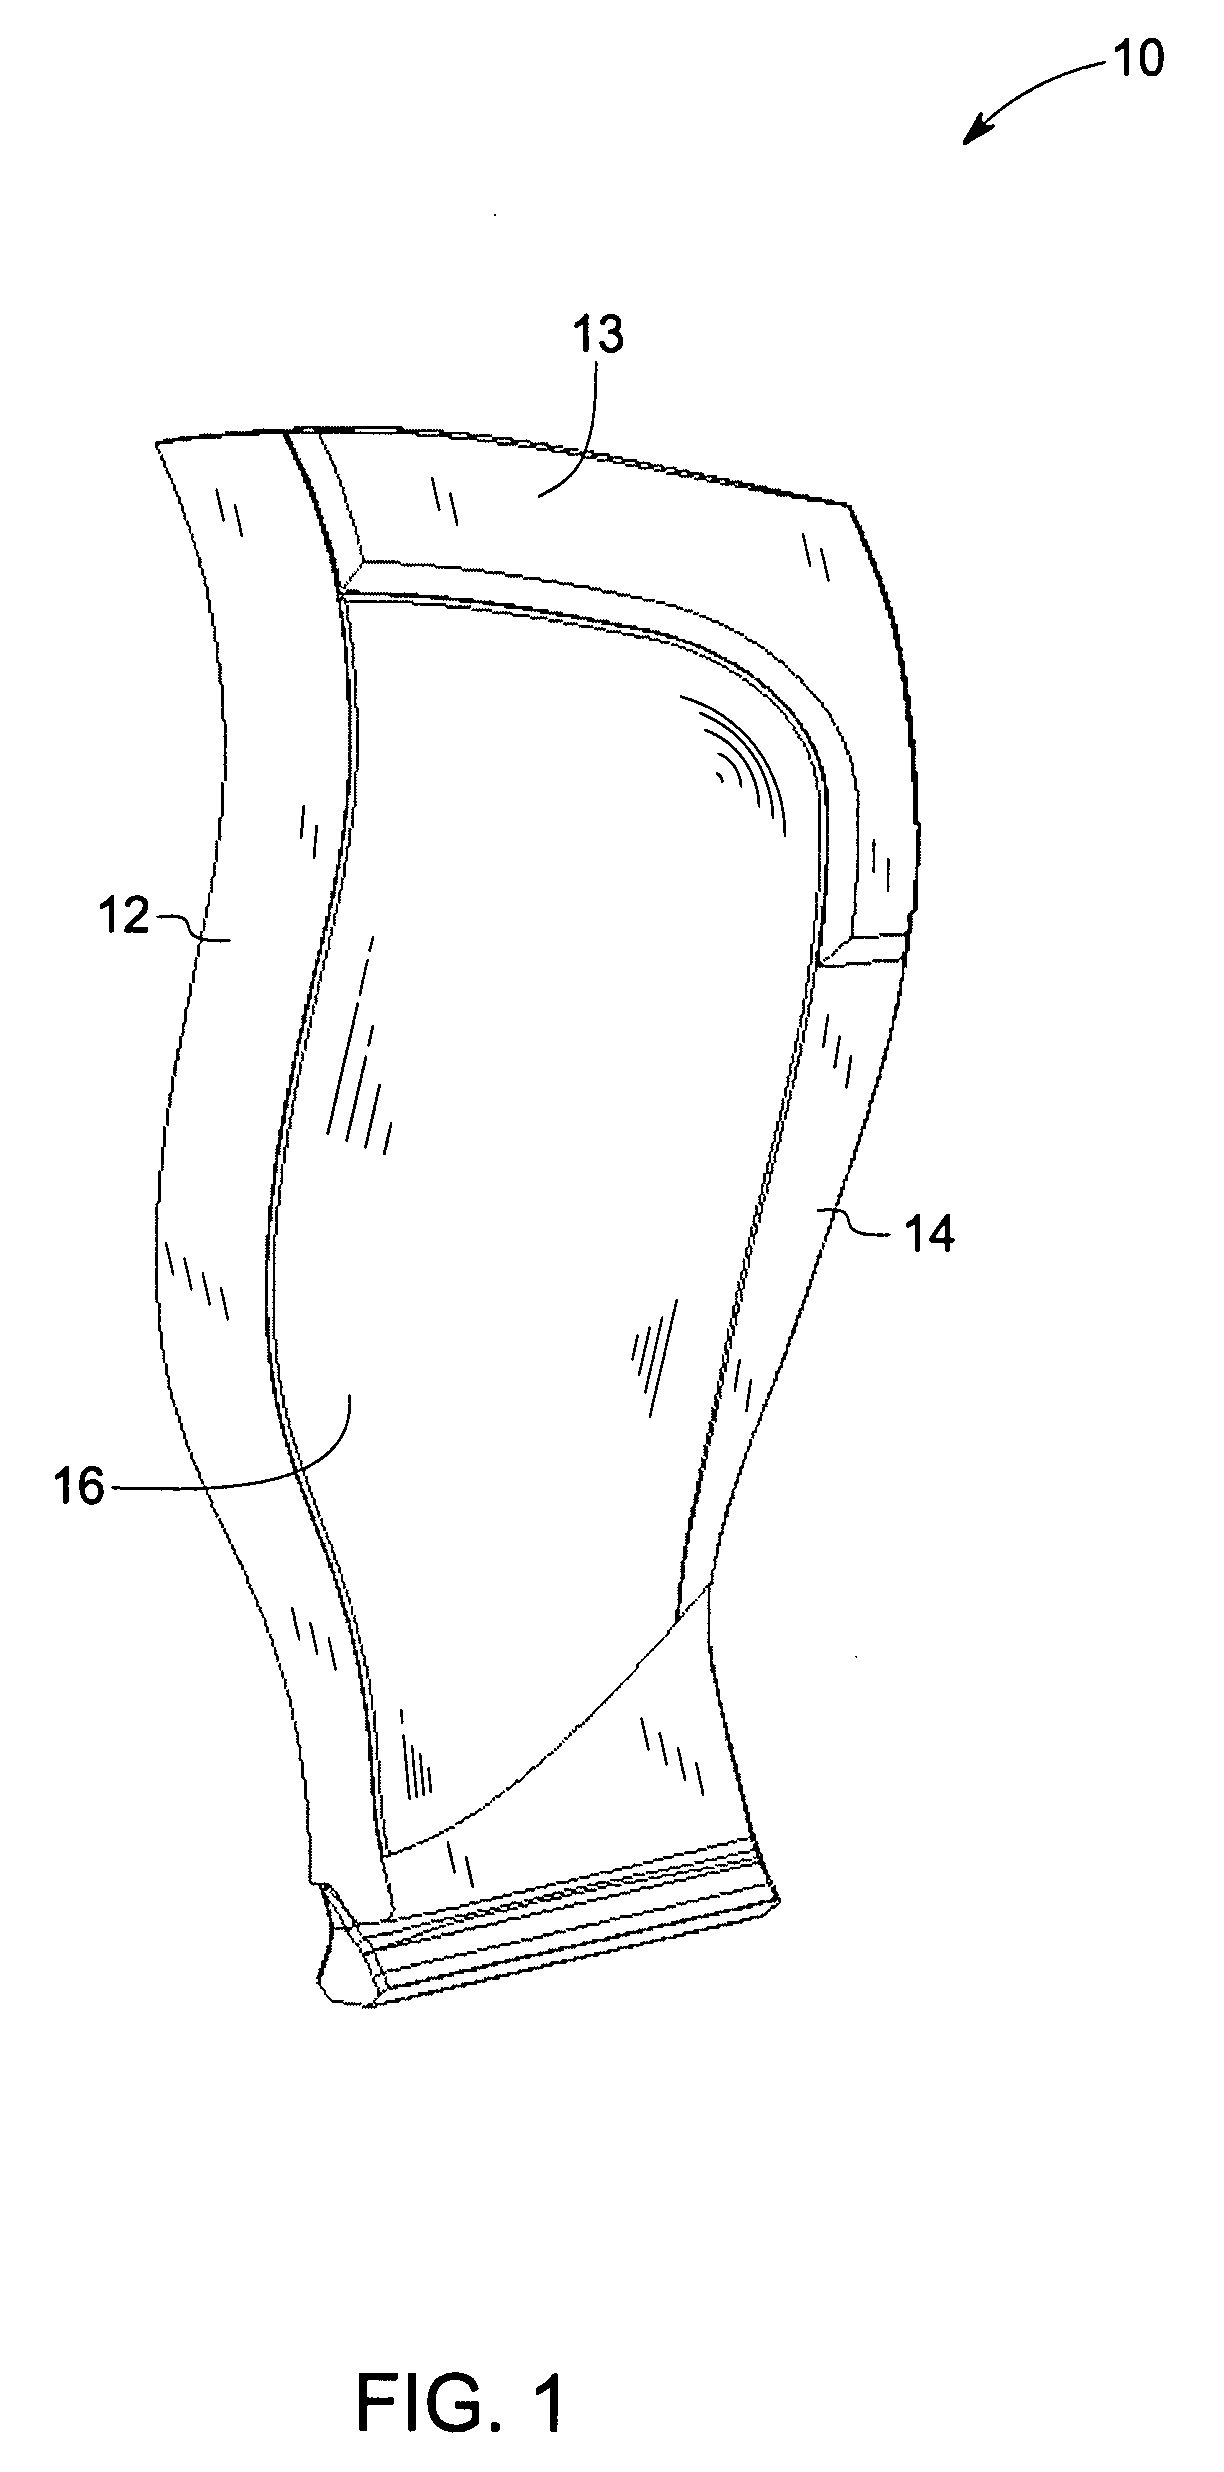 Method for roughening metal surfaces and article manufactured thereby